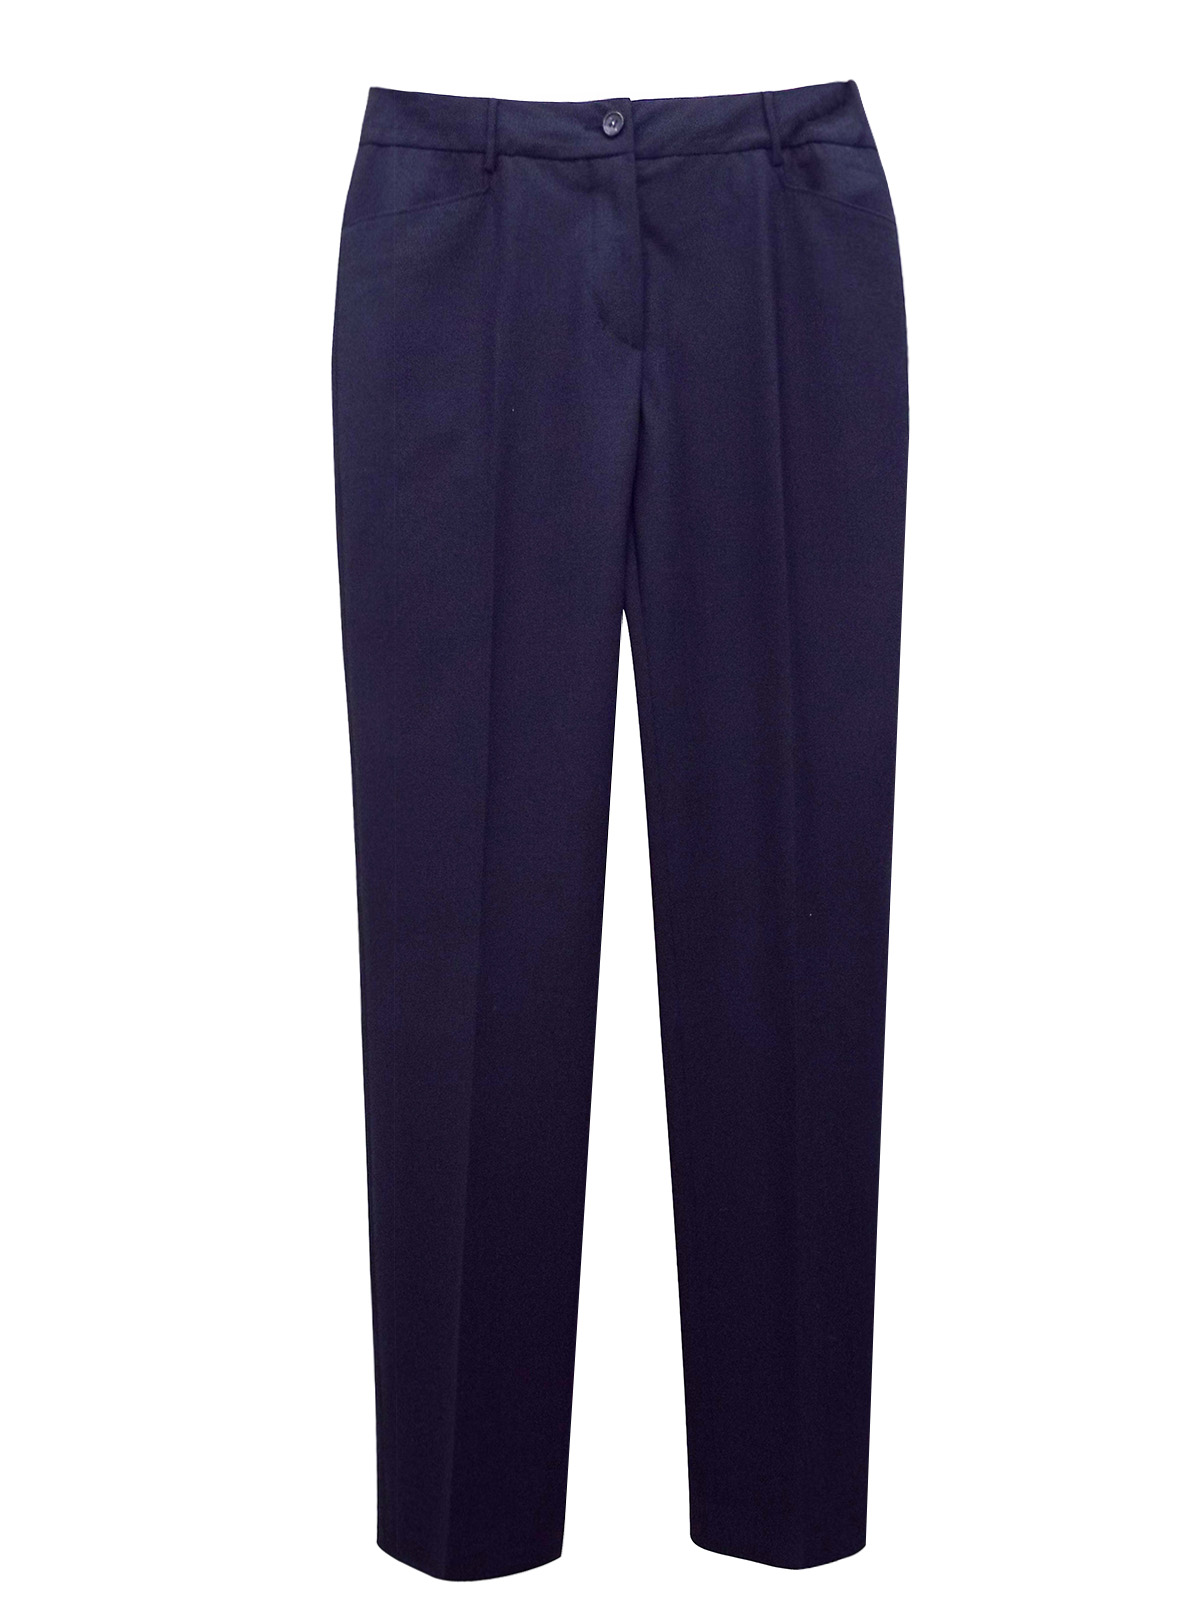 Tailor - - Tailor NAVY Molly Wool Blend Straight Leg Workwear Trousers ...